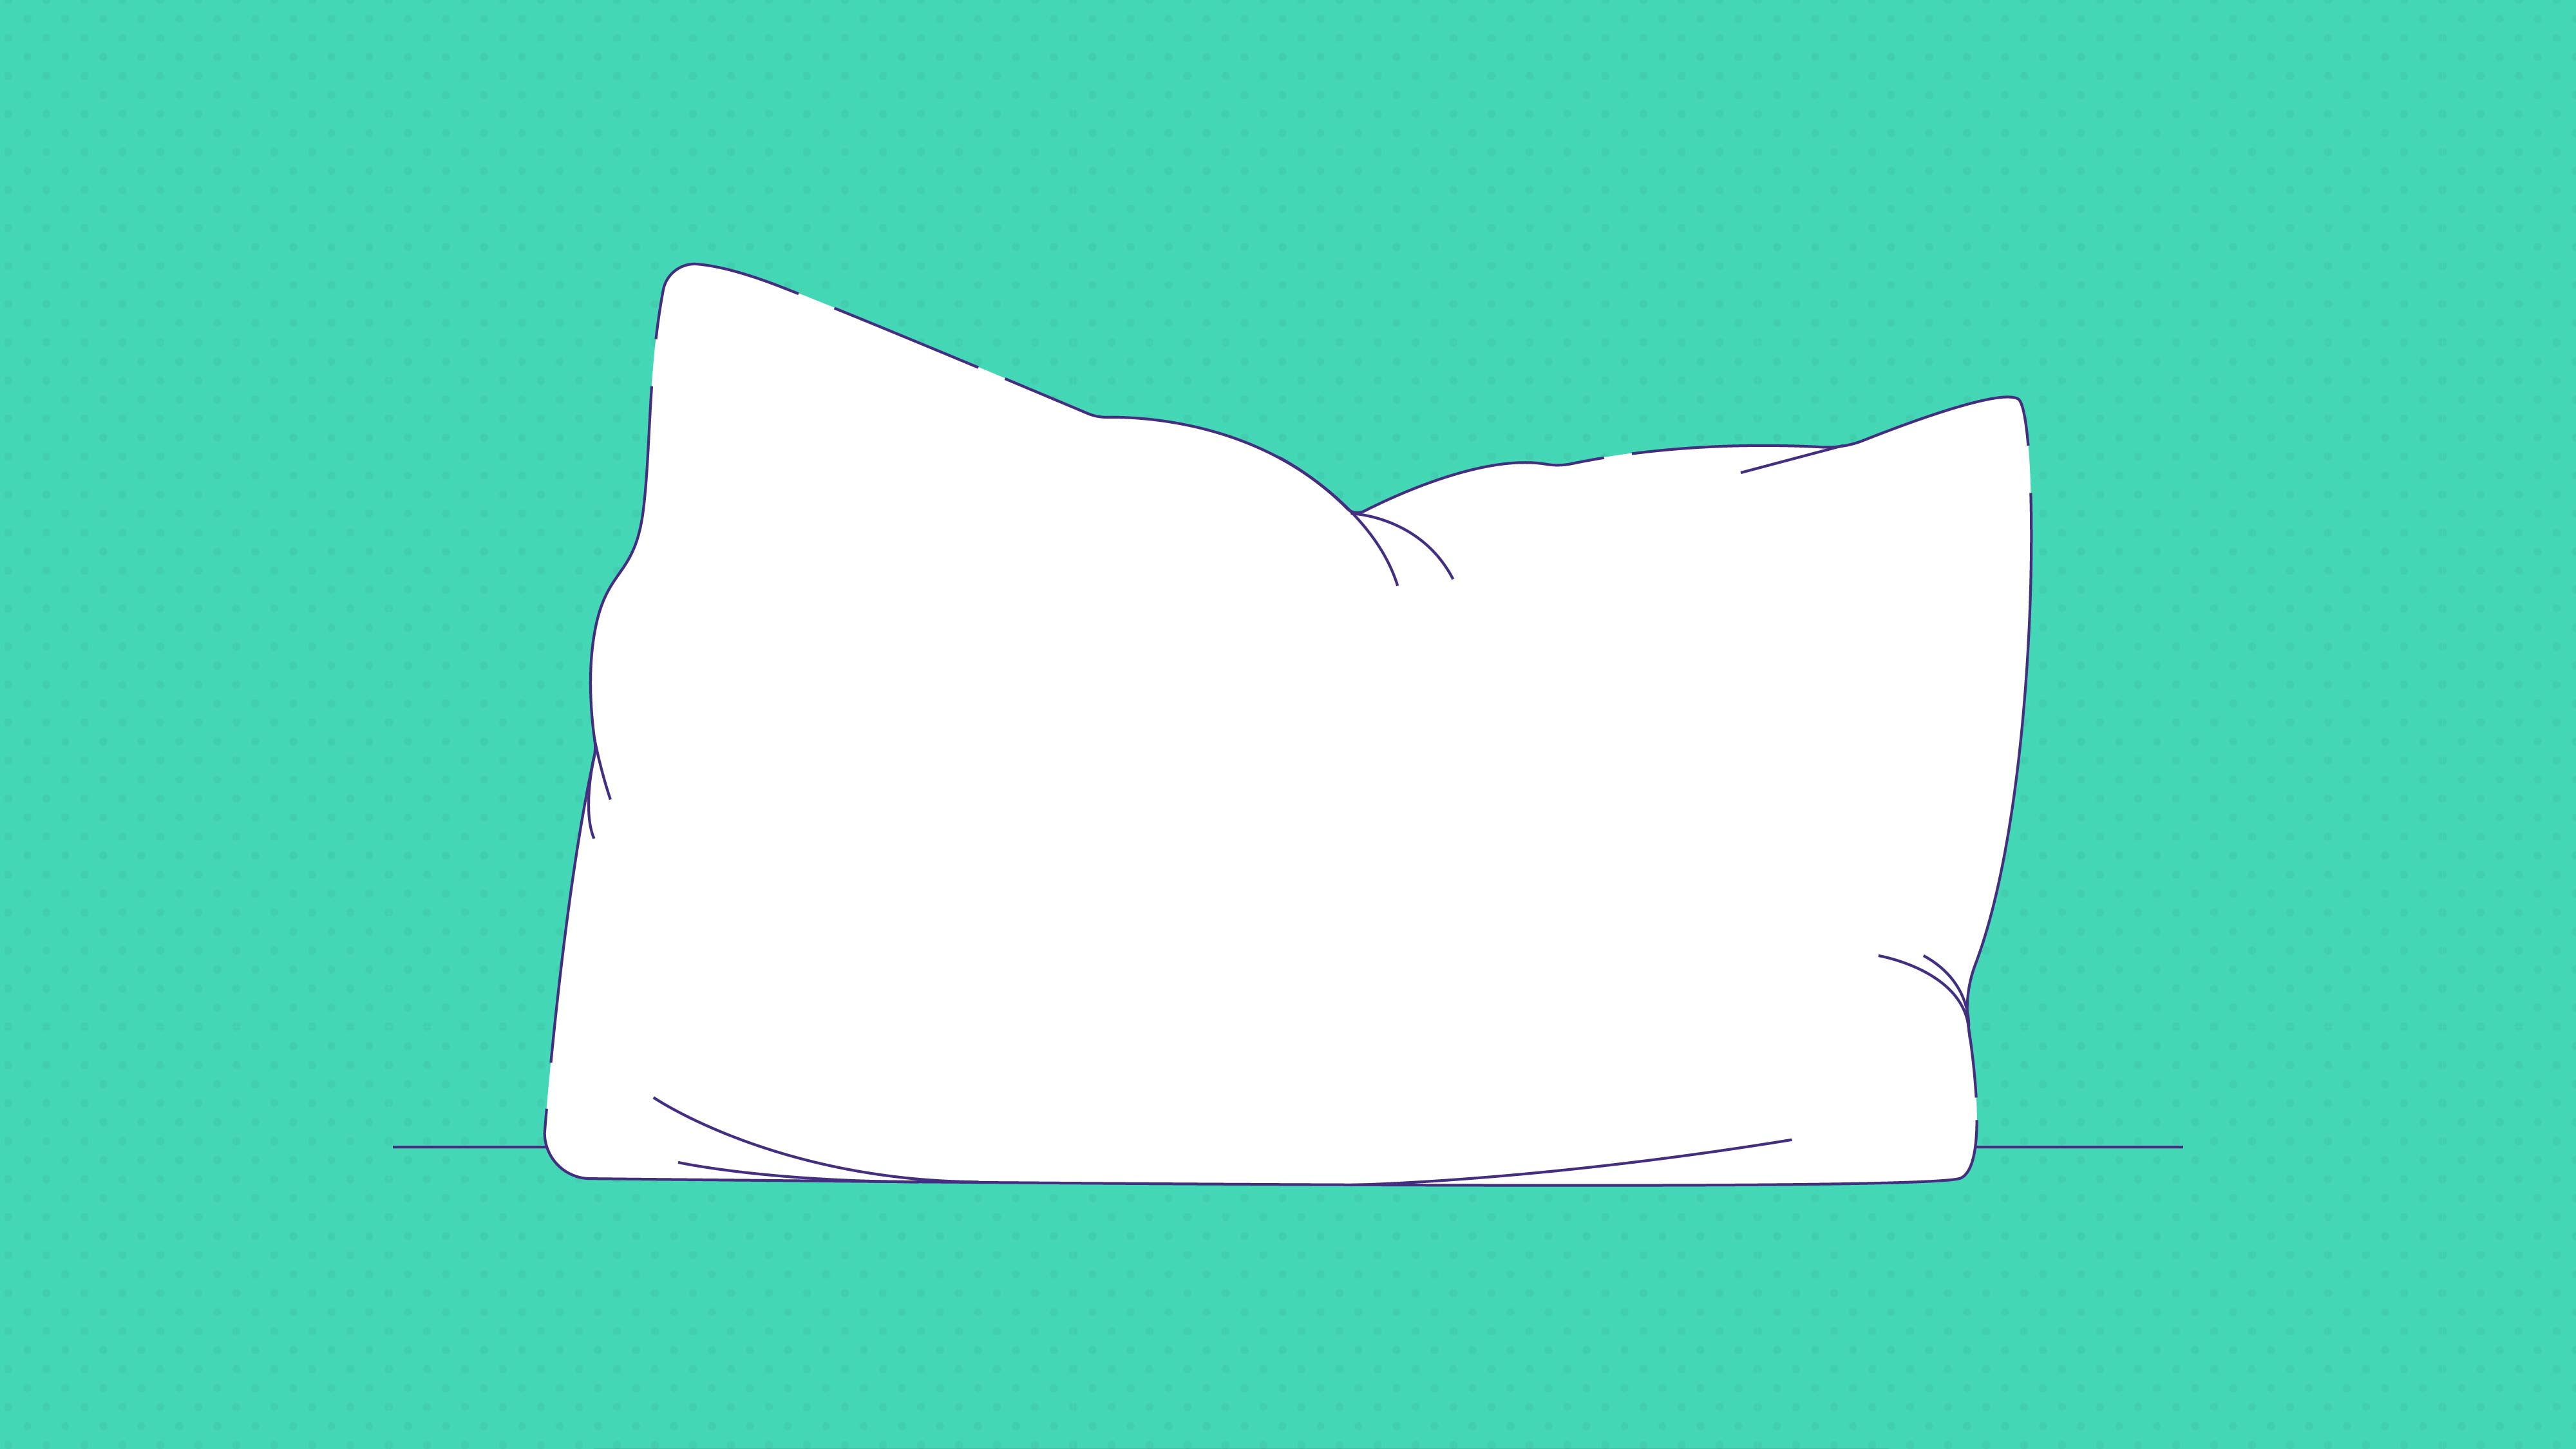 How To Stuff A Throw Pillow Cover : 7 Secrets